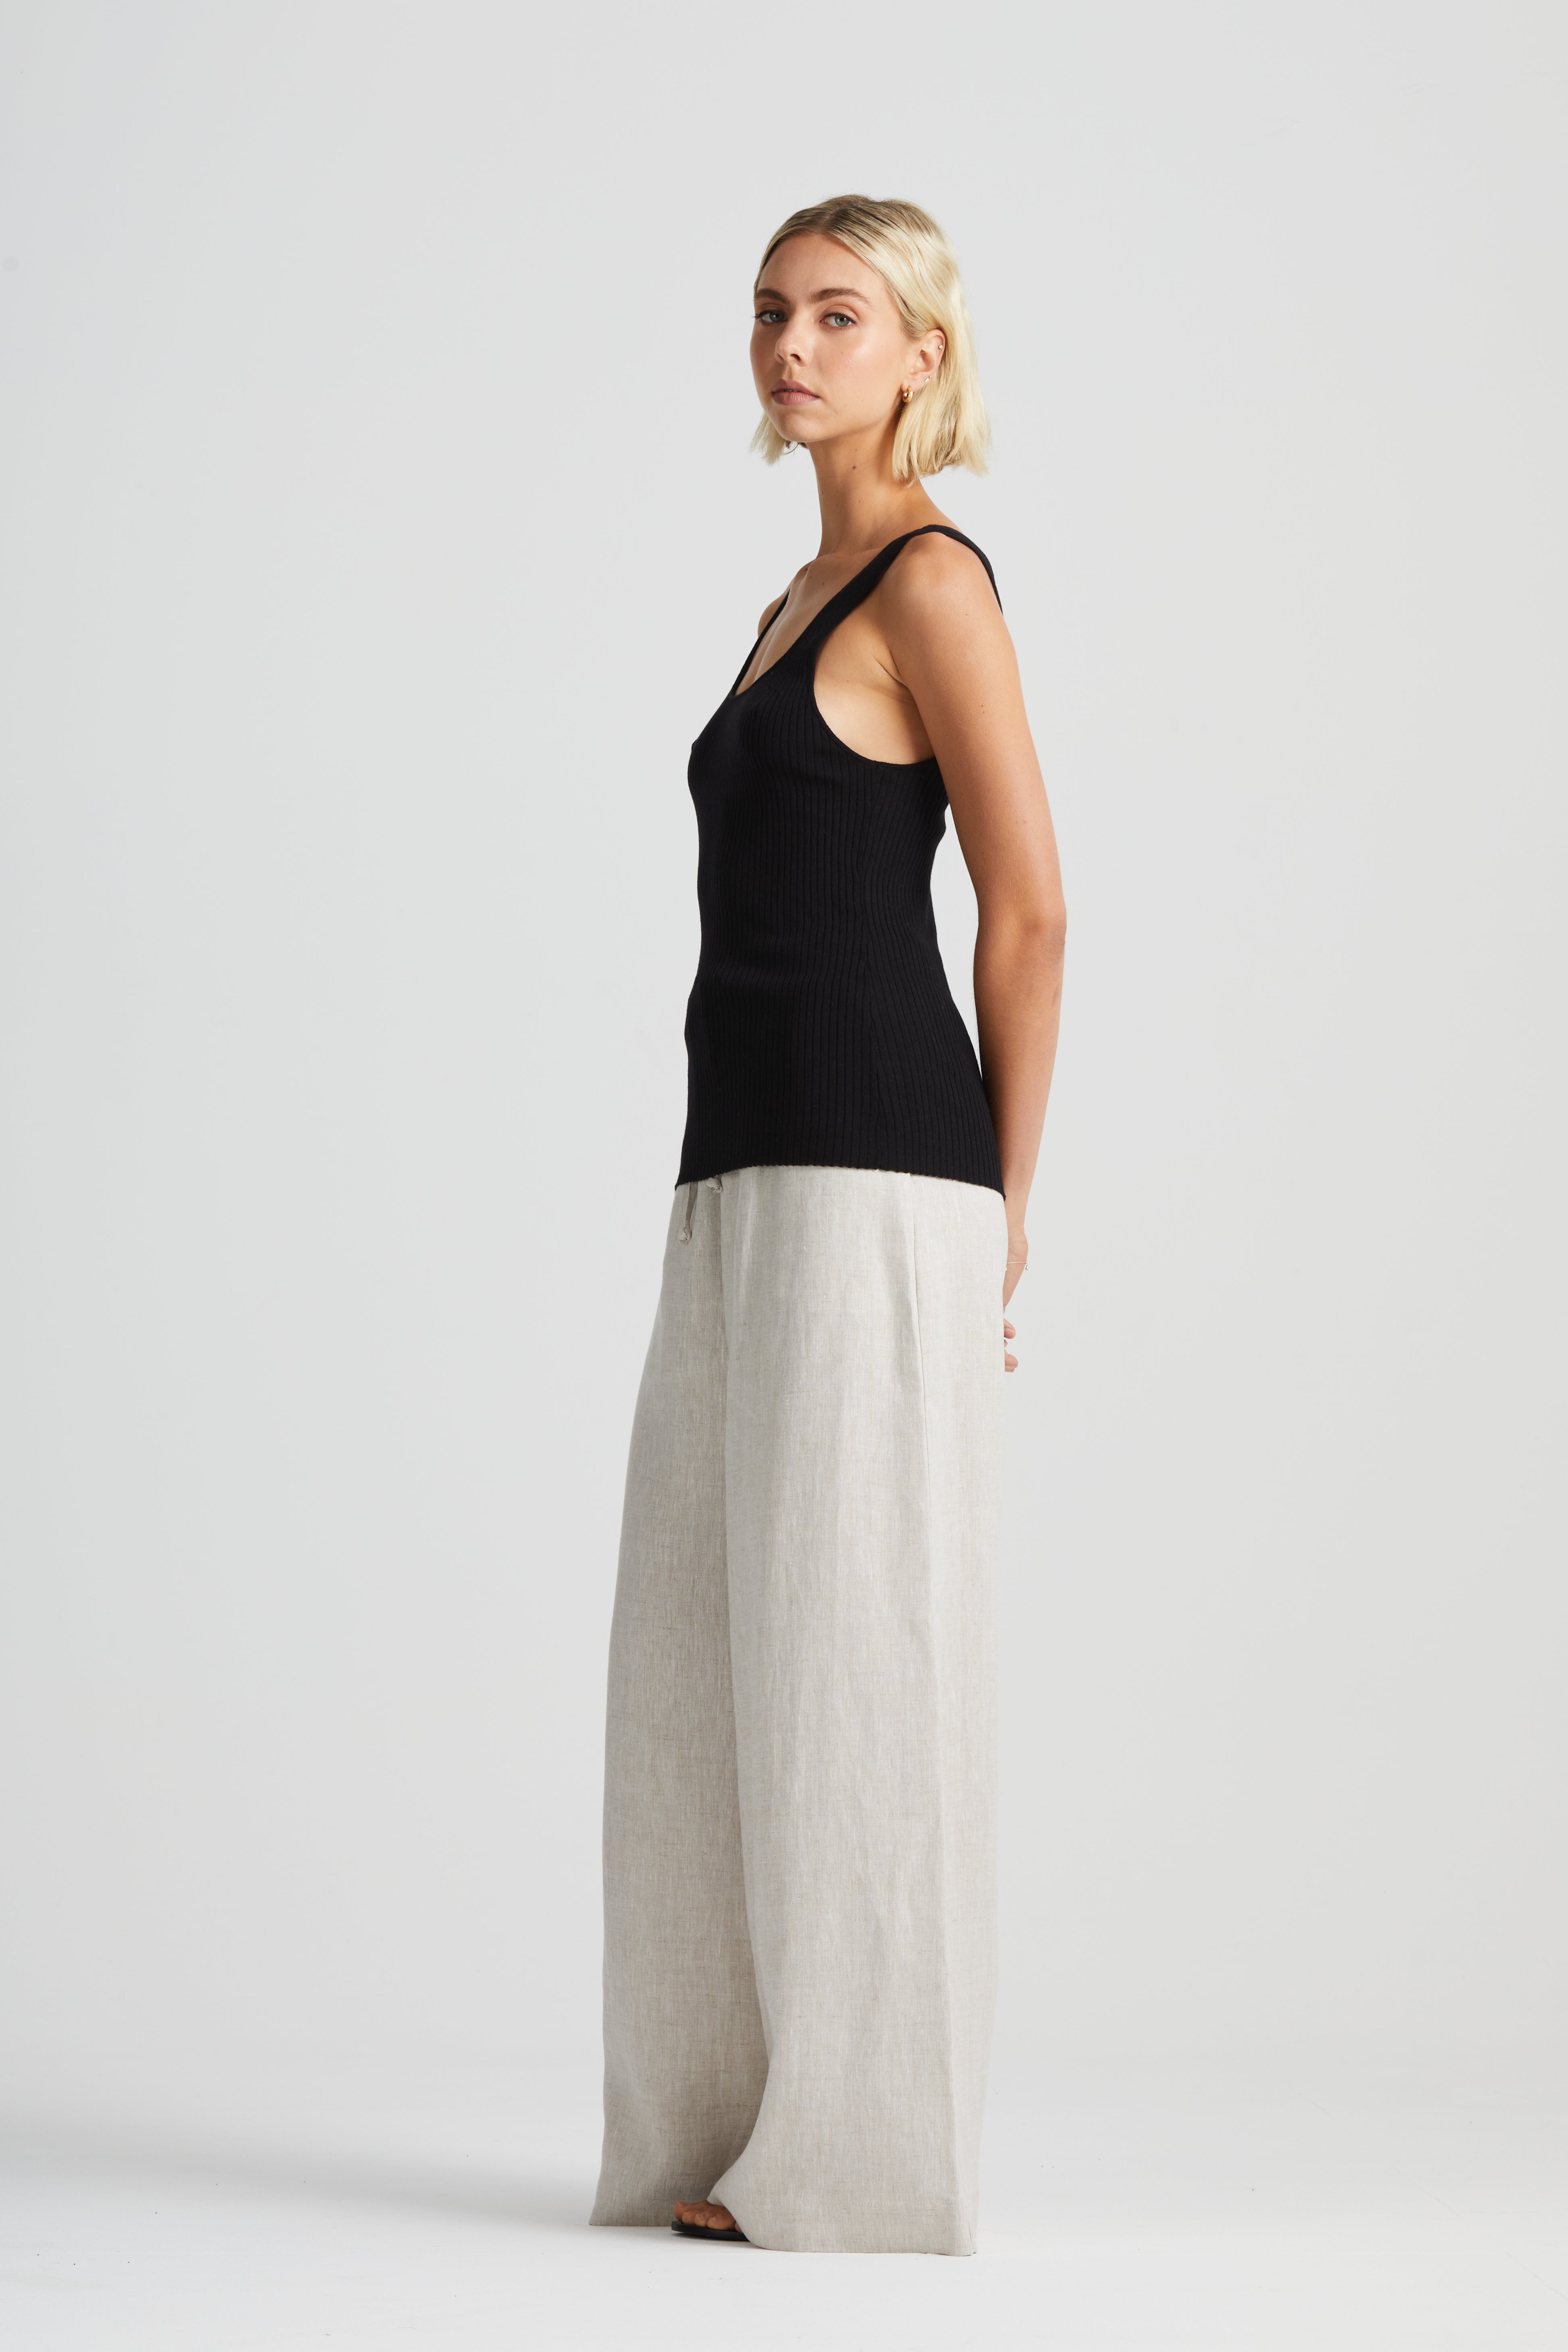 The Scoop Knit Tank | 2 Colour-ways $220